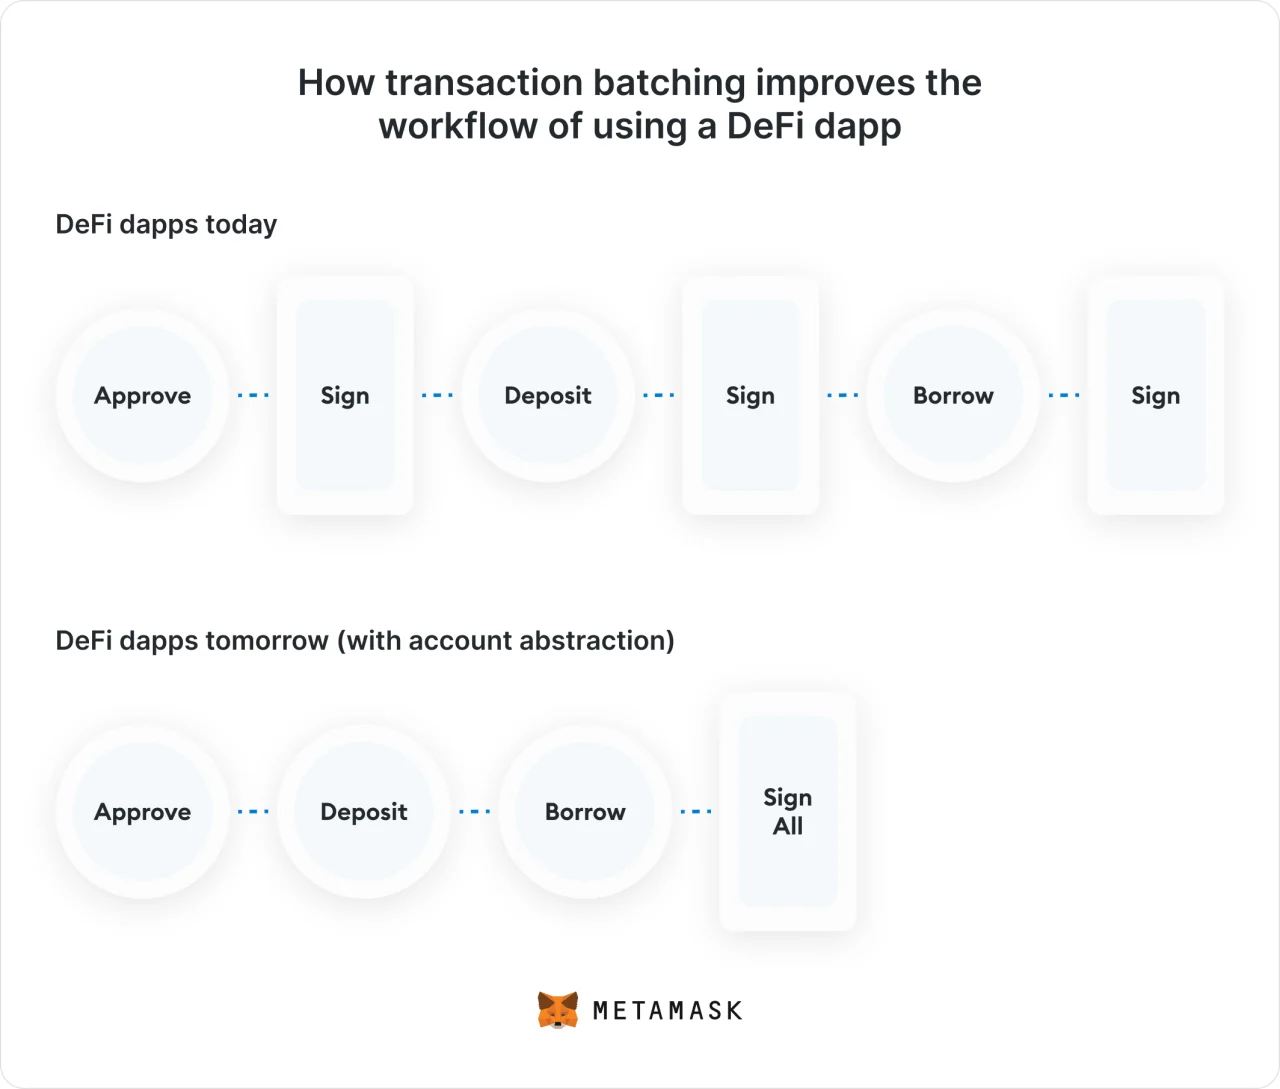 How transaction batching improves the workflow of using a DeFi dapp@2x